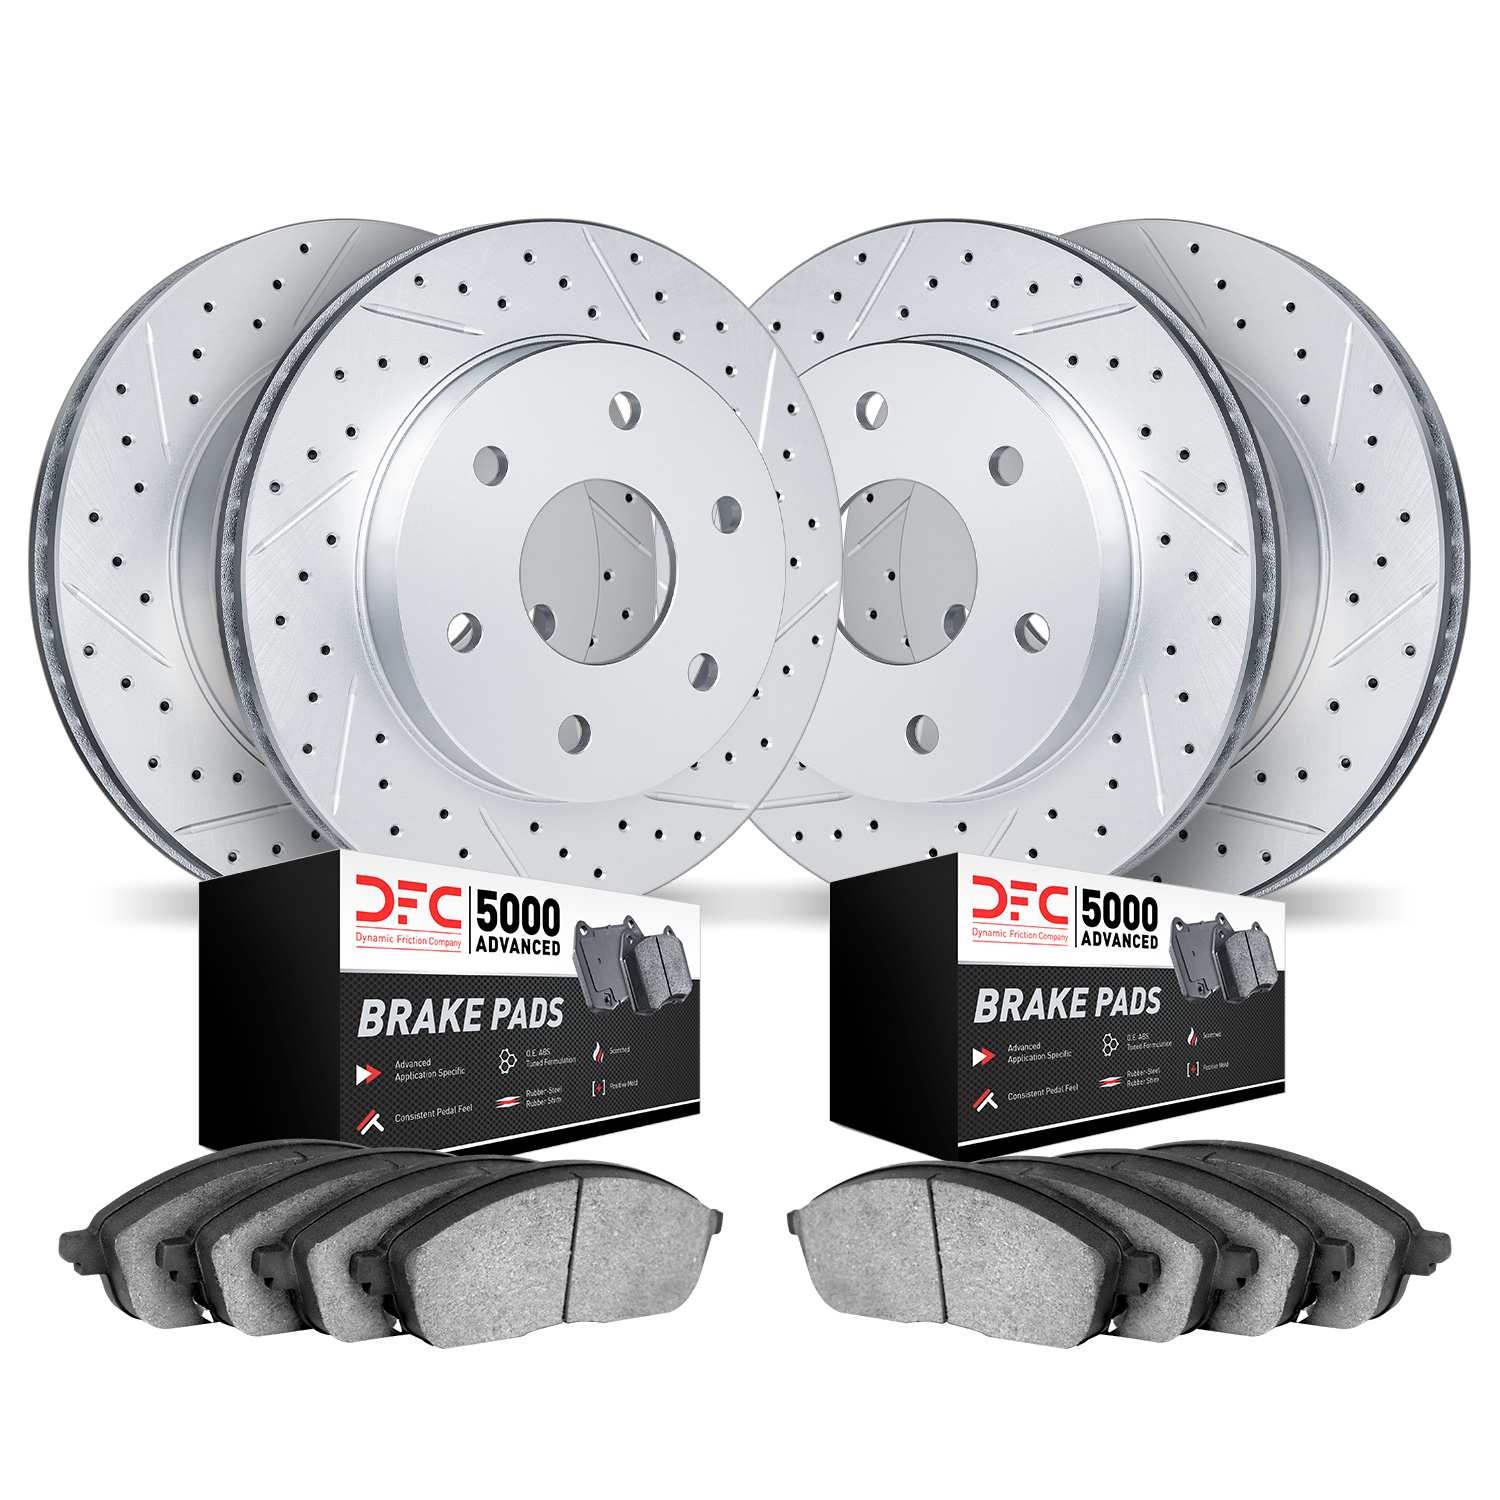 2504-46038 Geoperformance Drilled/Slotted Rotors w/5000 Advanced Brake Pads Kit, 2004-2009 GM, Position: Front and Rear